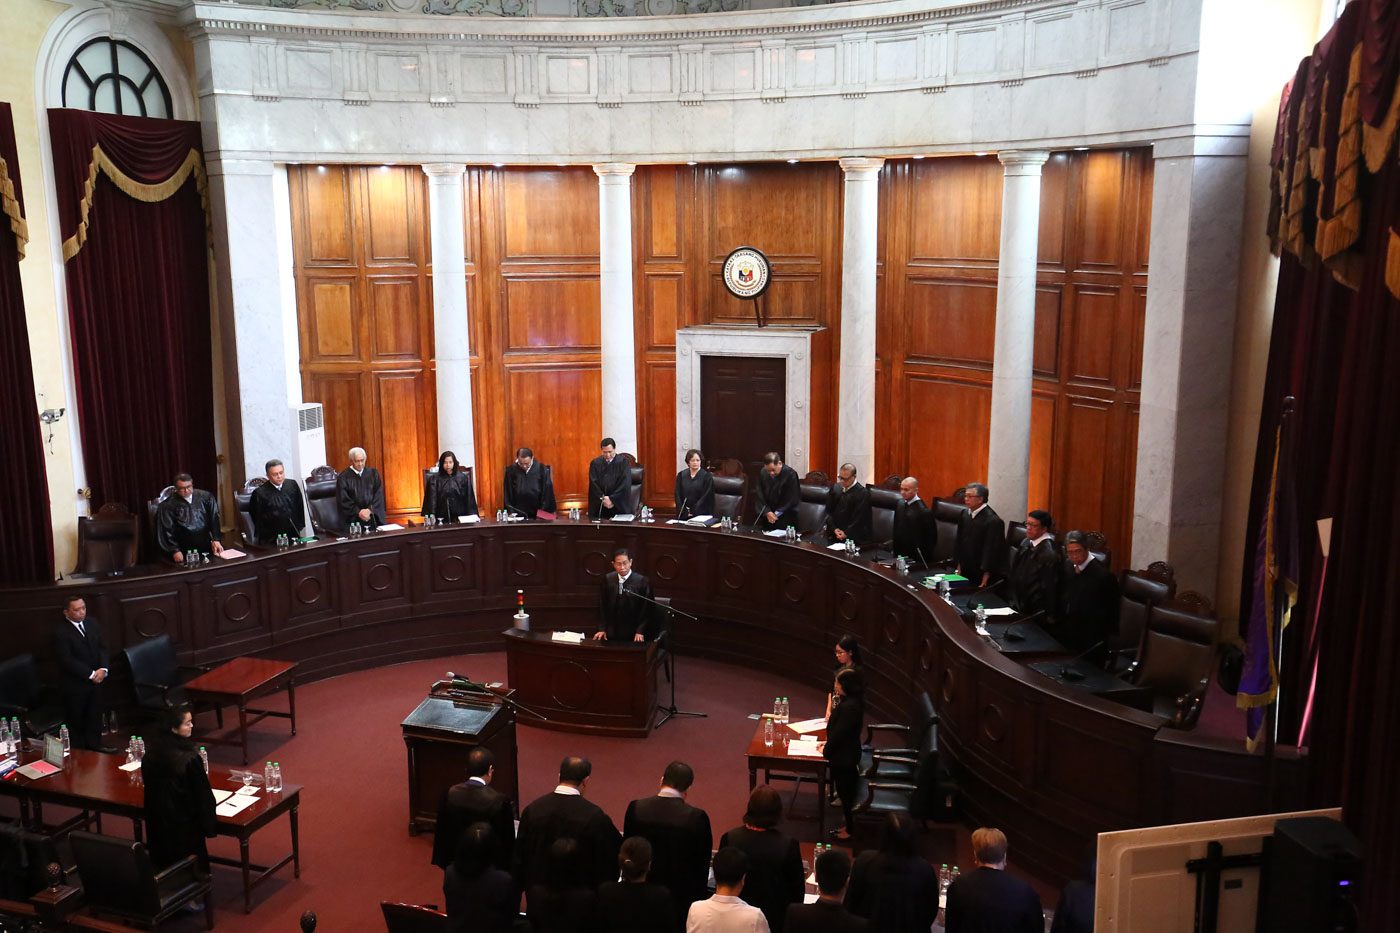 Supreme Court denies requests for justices’ full SALNs